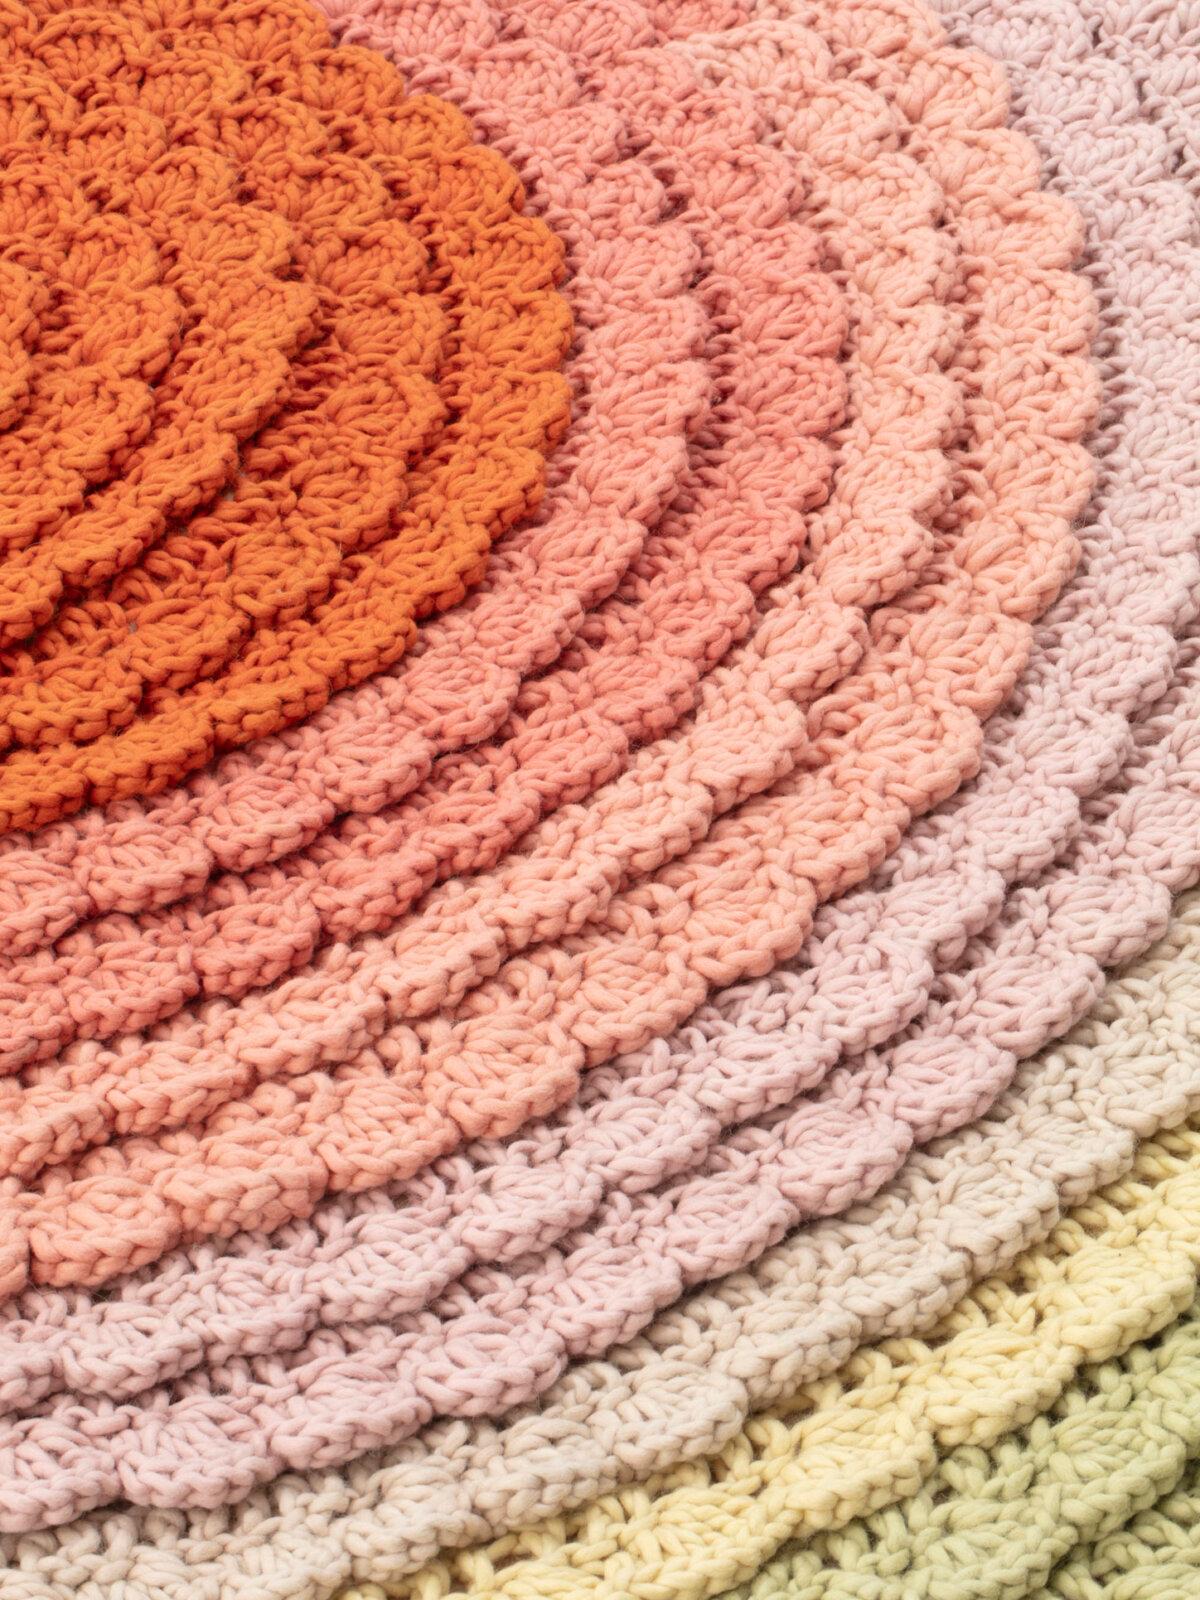 The Swirl Collection offers a variety of rugs inspired by the four seasons, with evocative names such as Autumn, Spring, Winter and Summer. Each rug is a unique interpretation of the nuances and feelings of each season, creating an immersive sensory